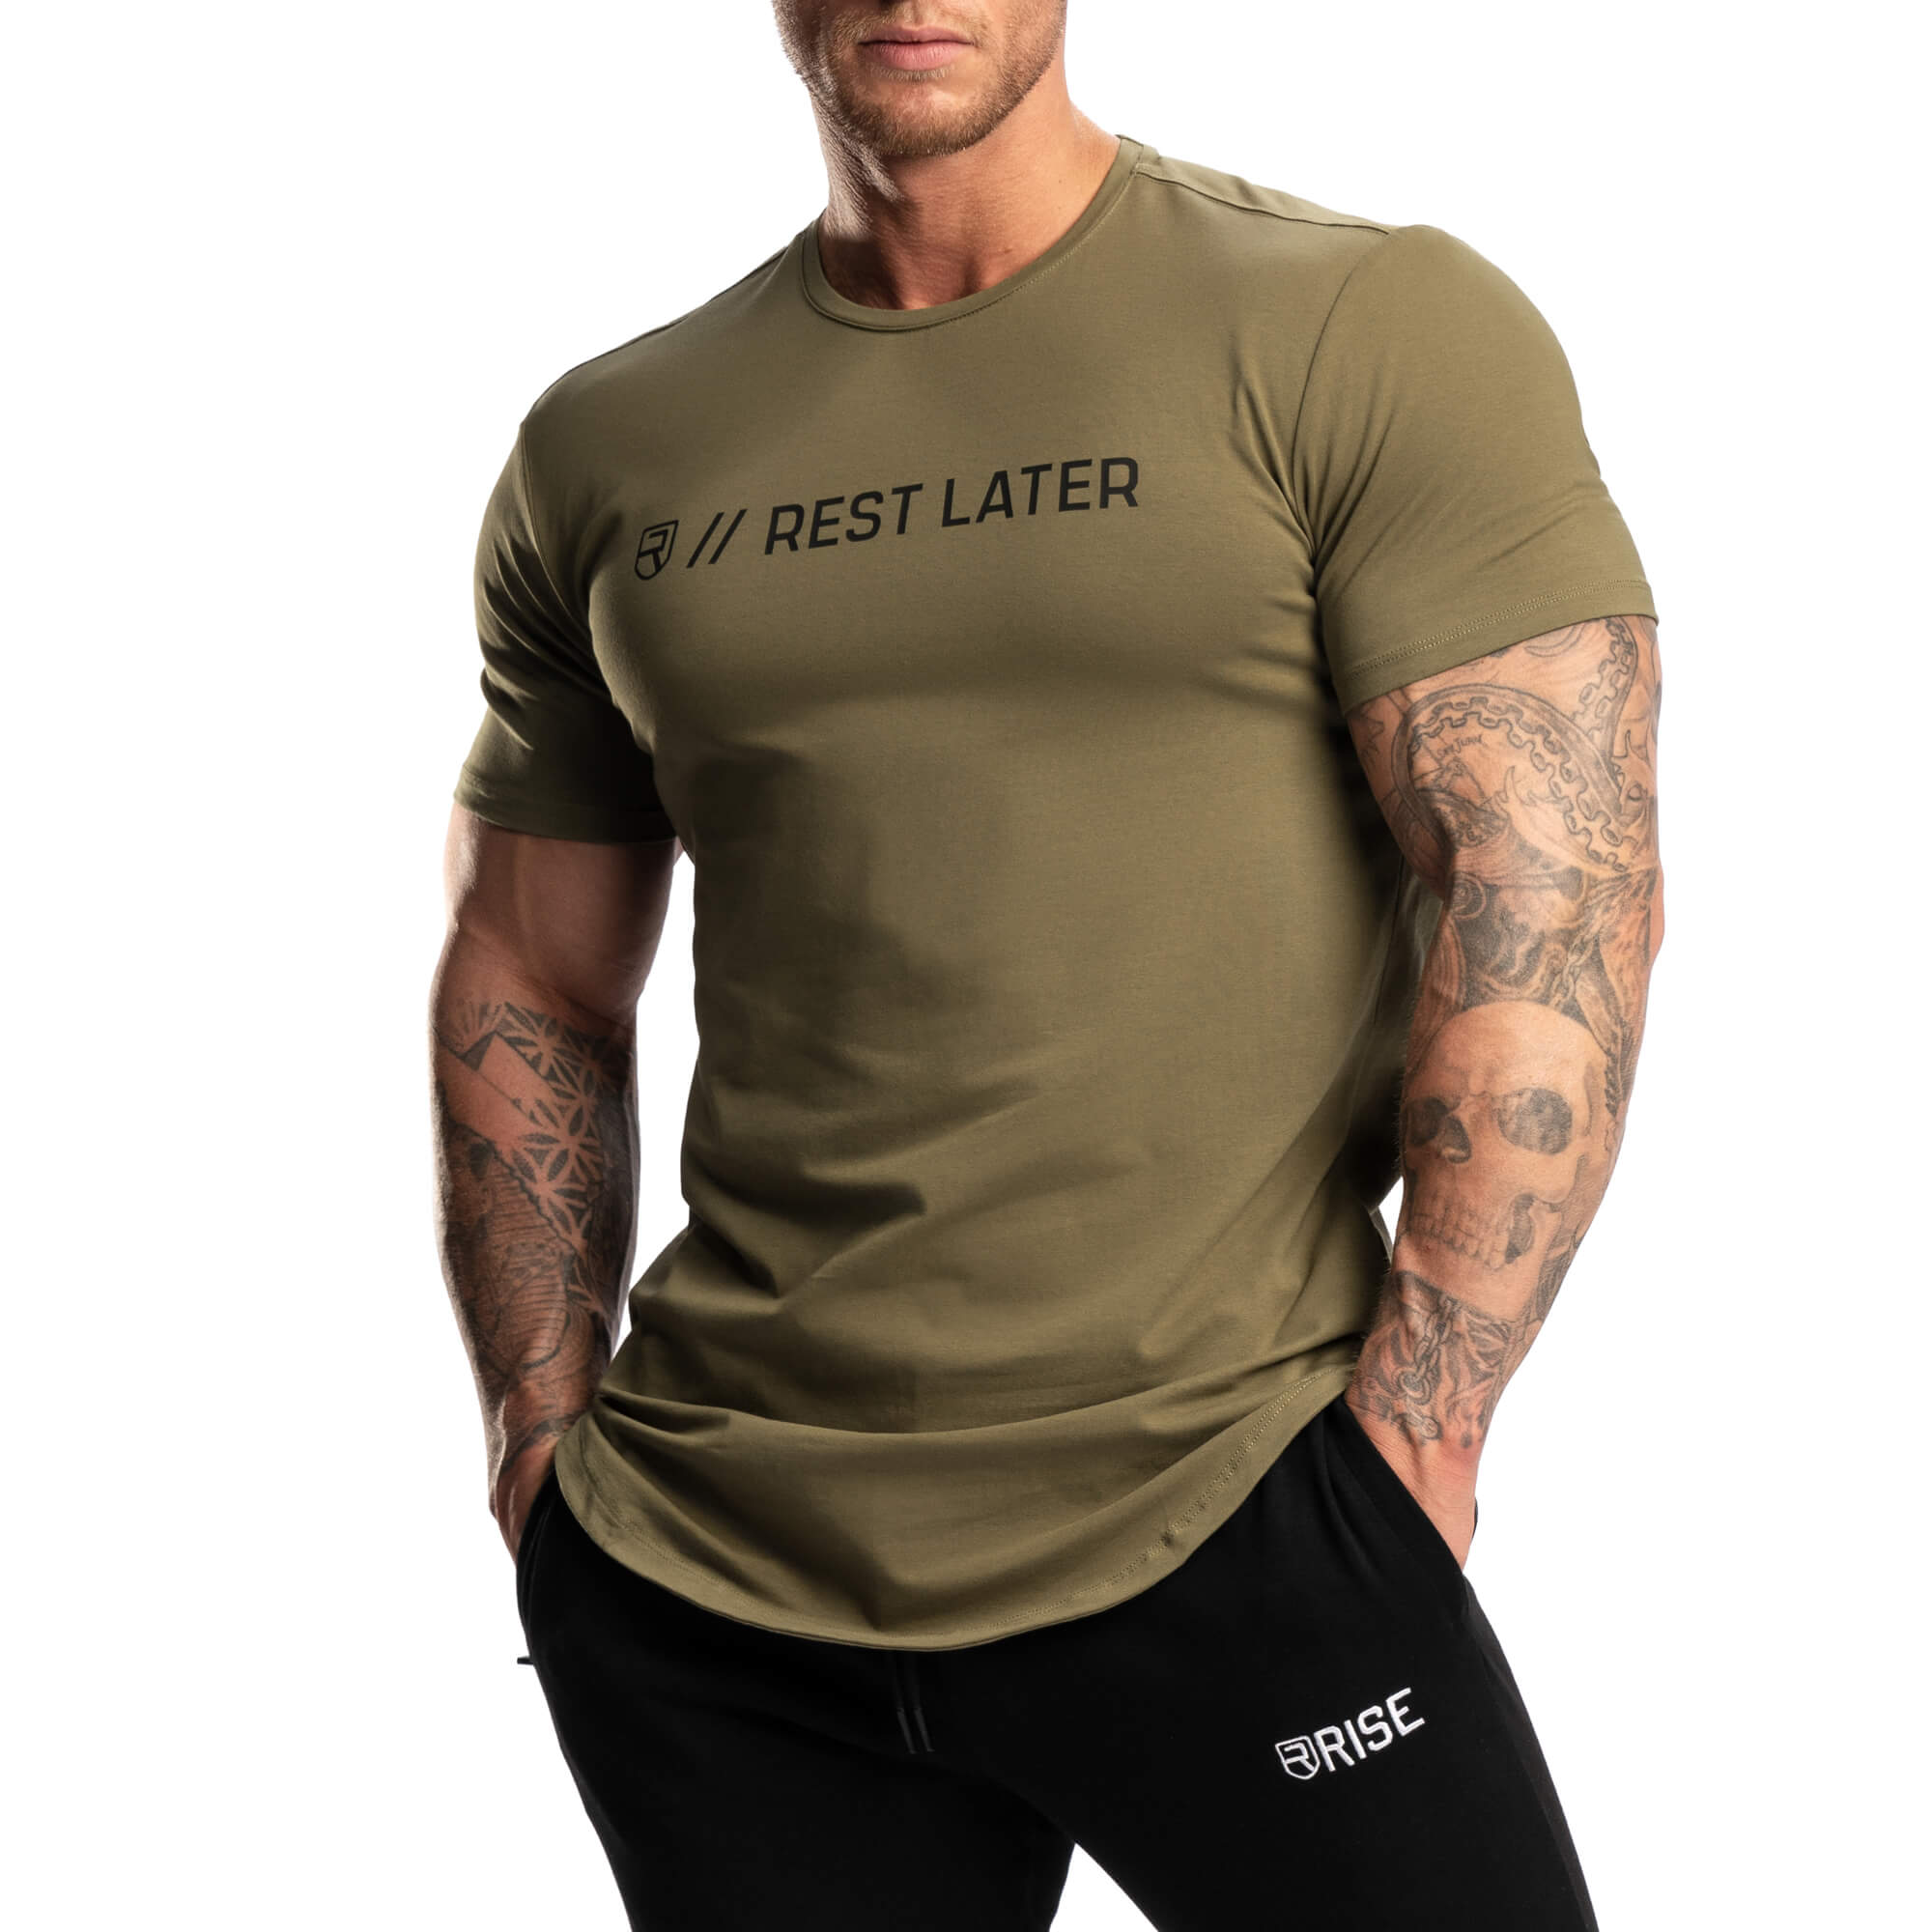 Rest Later T-Shirt - Army Green